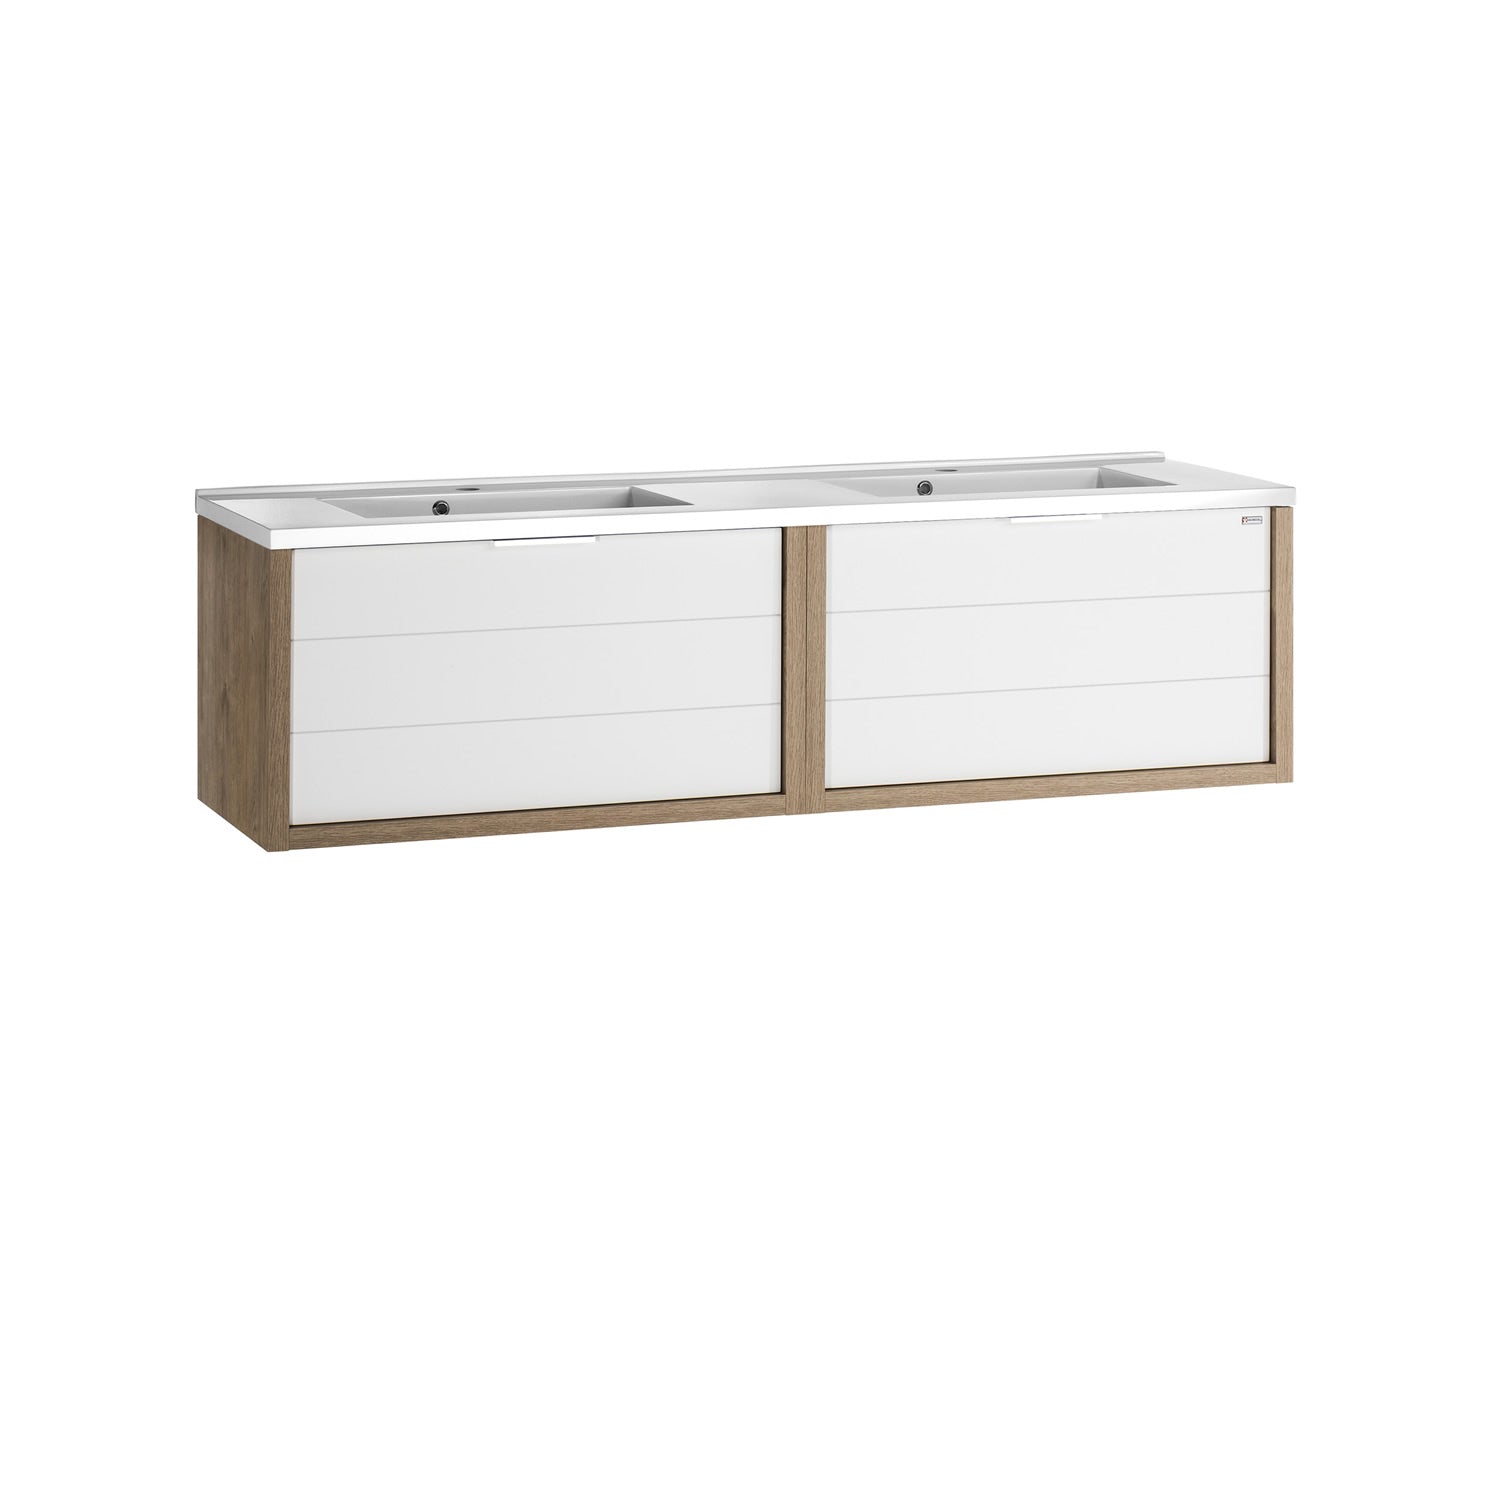 80" Double Vanity, Wall Mount, 2 Drawers with Soft Close, Oak - White, Serie Tino by VALENZUELA